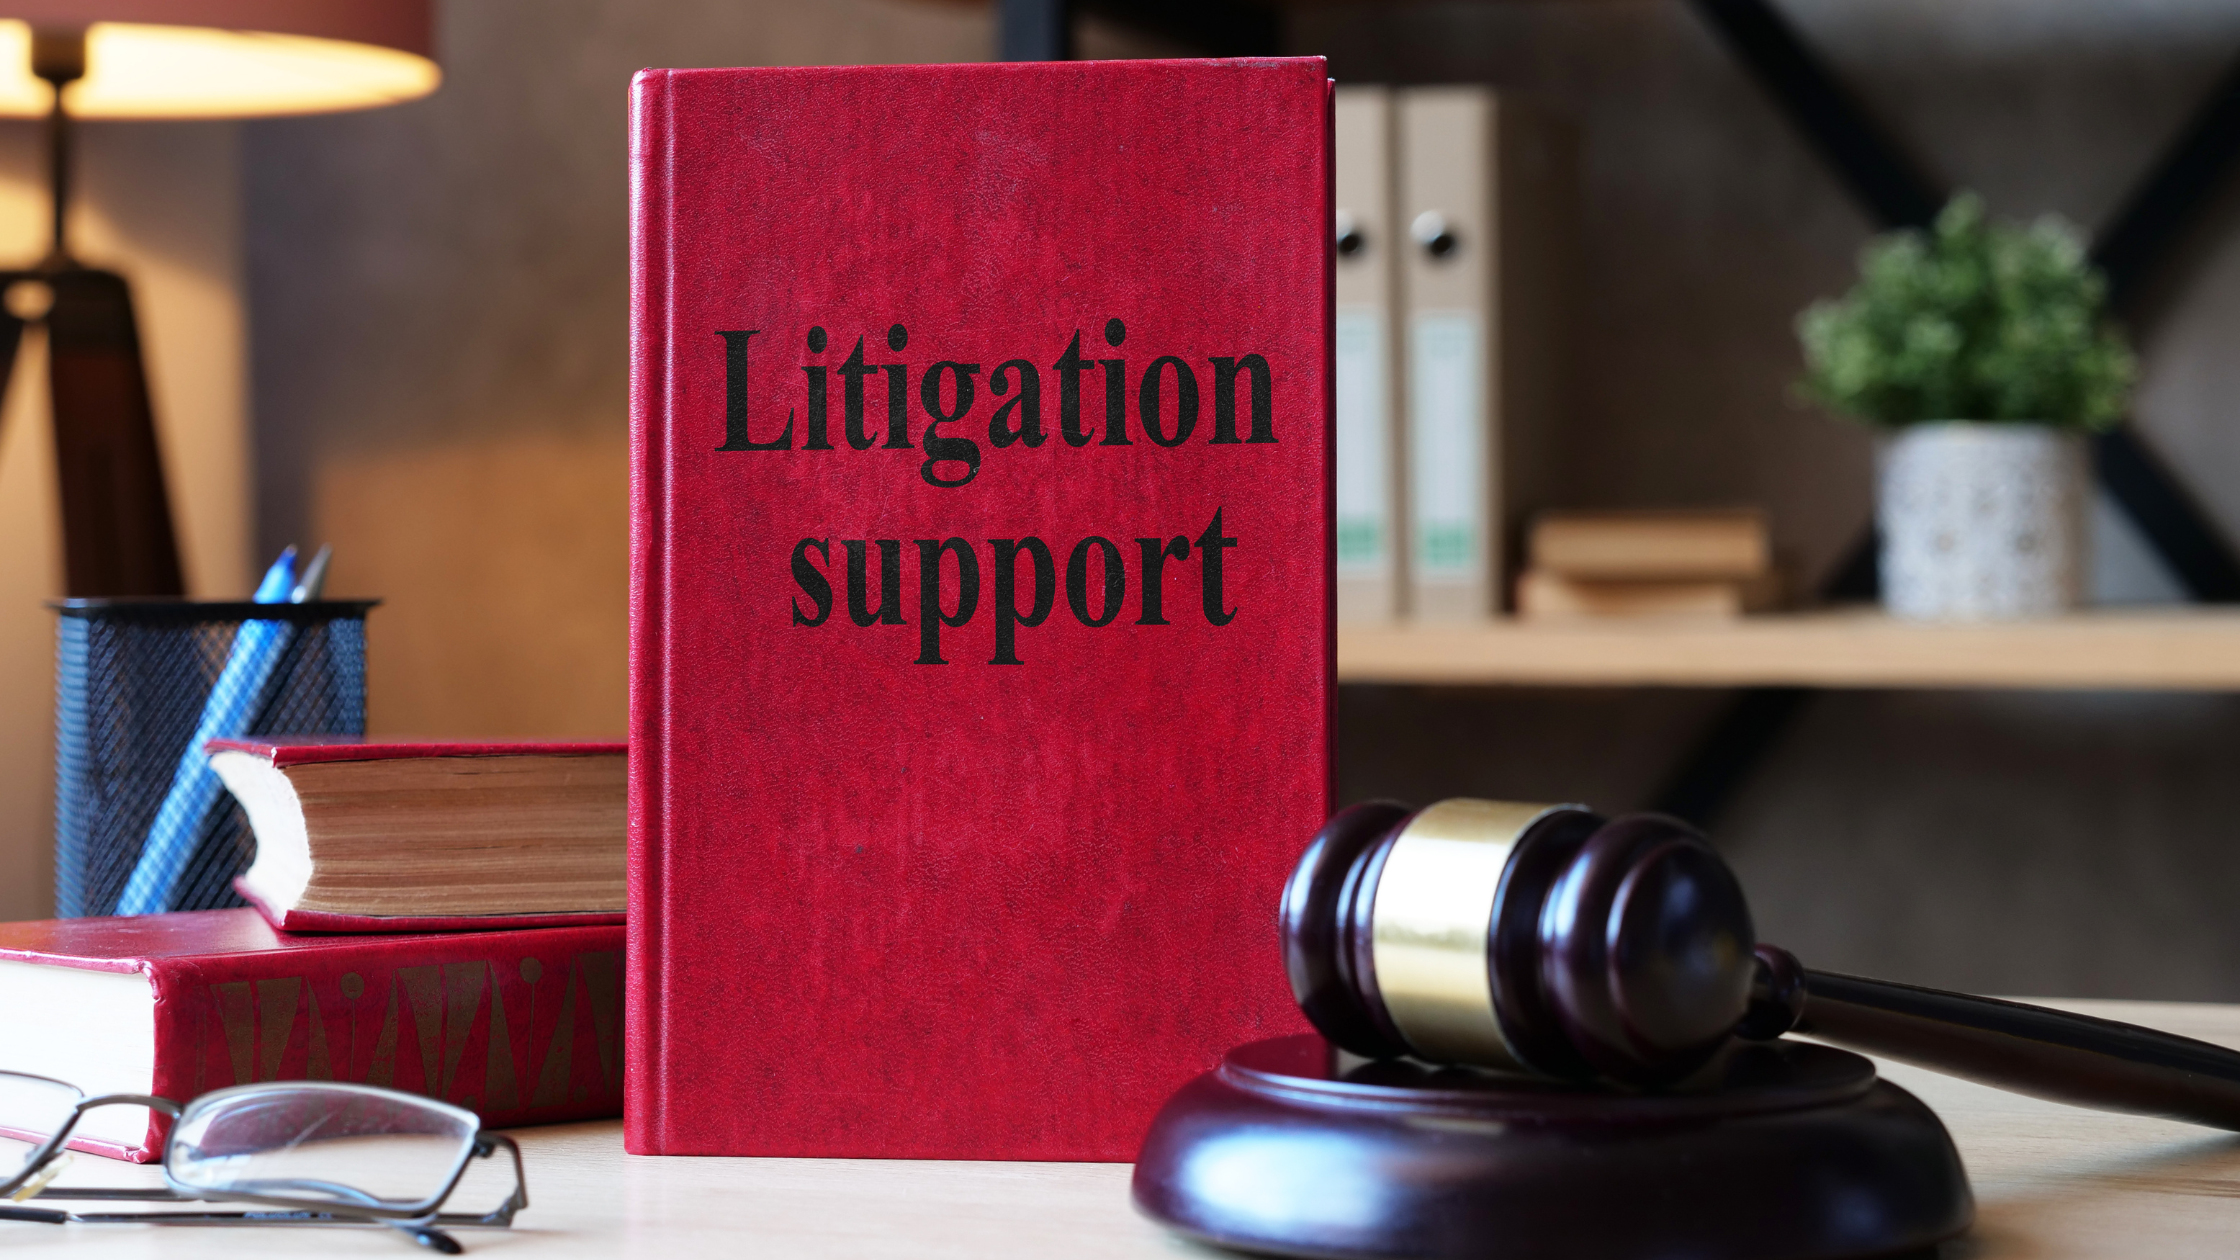 A litigation support book, a gavel, and other books are on a table to depict where a litigation paralegal career can lead to.